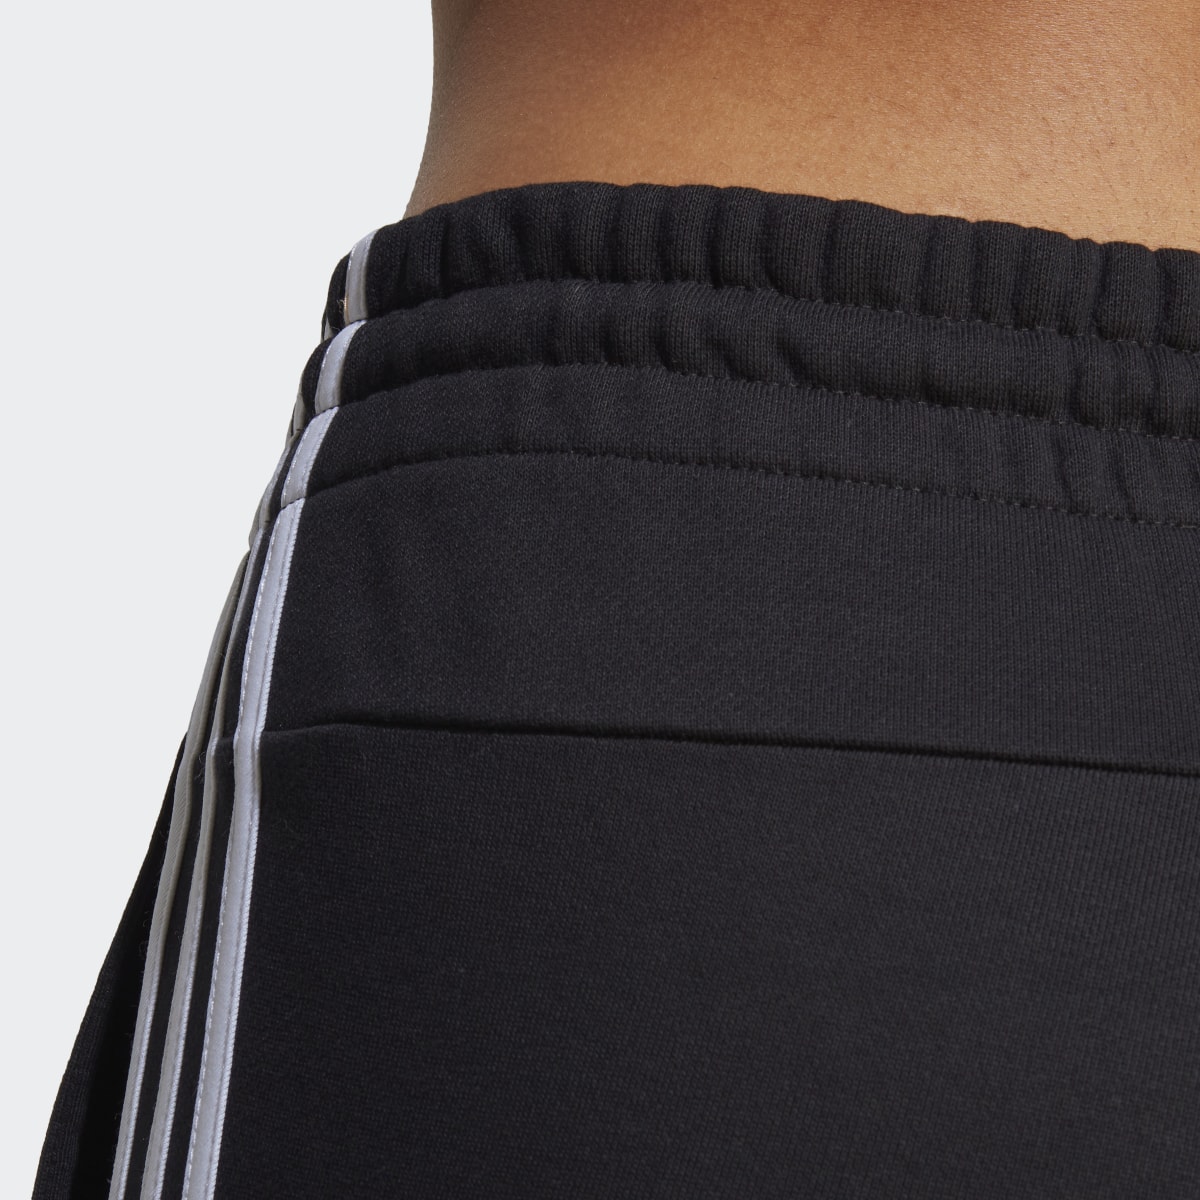 Adidas Essentials 3-Stripes French Terry Cuffed Pants. 8